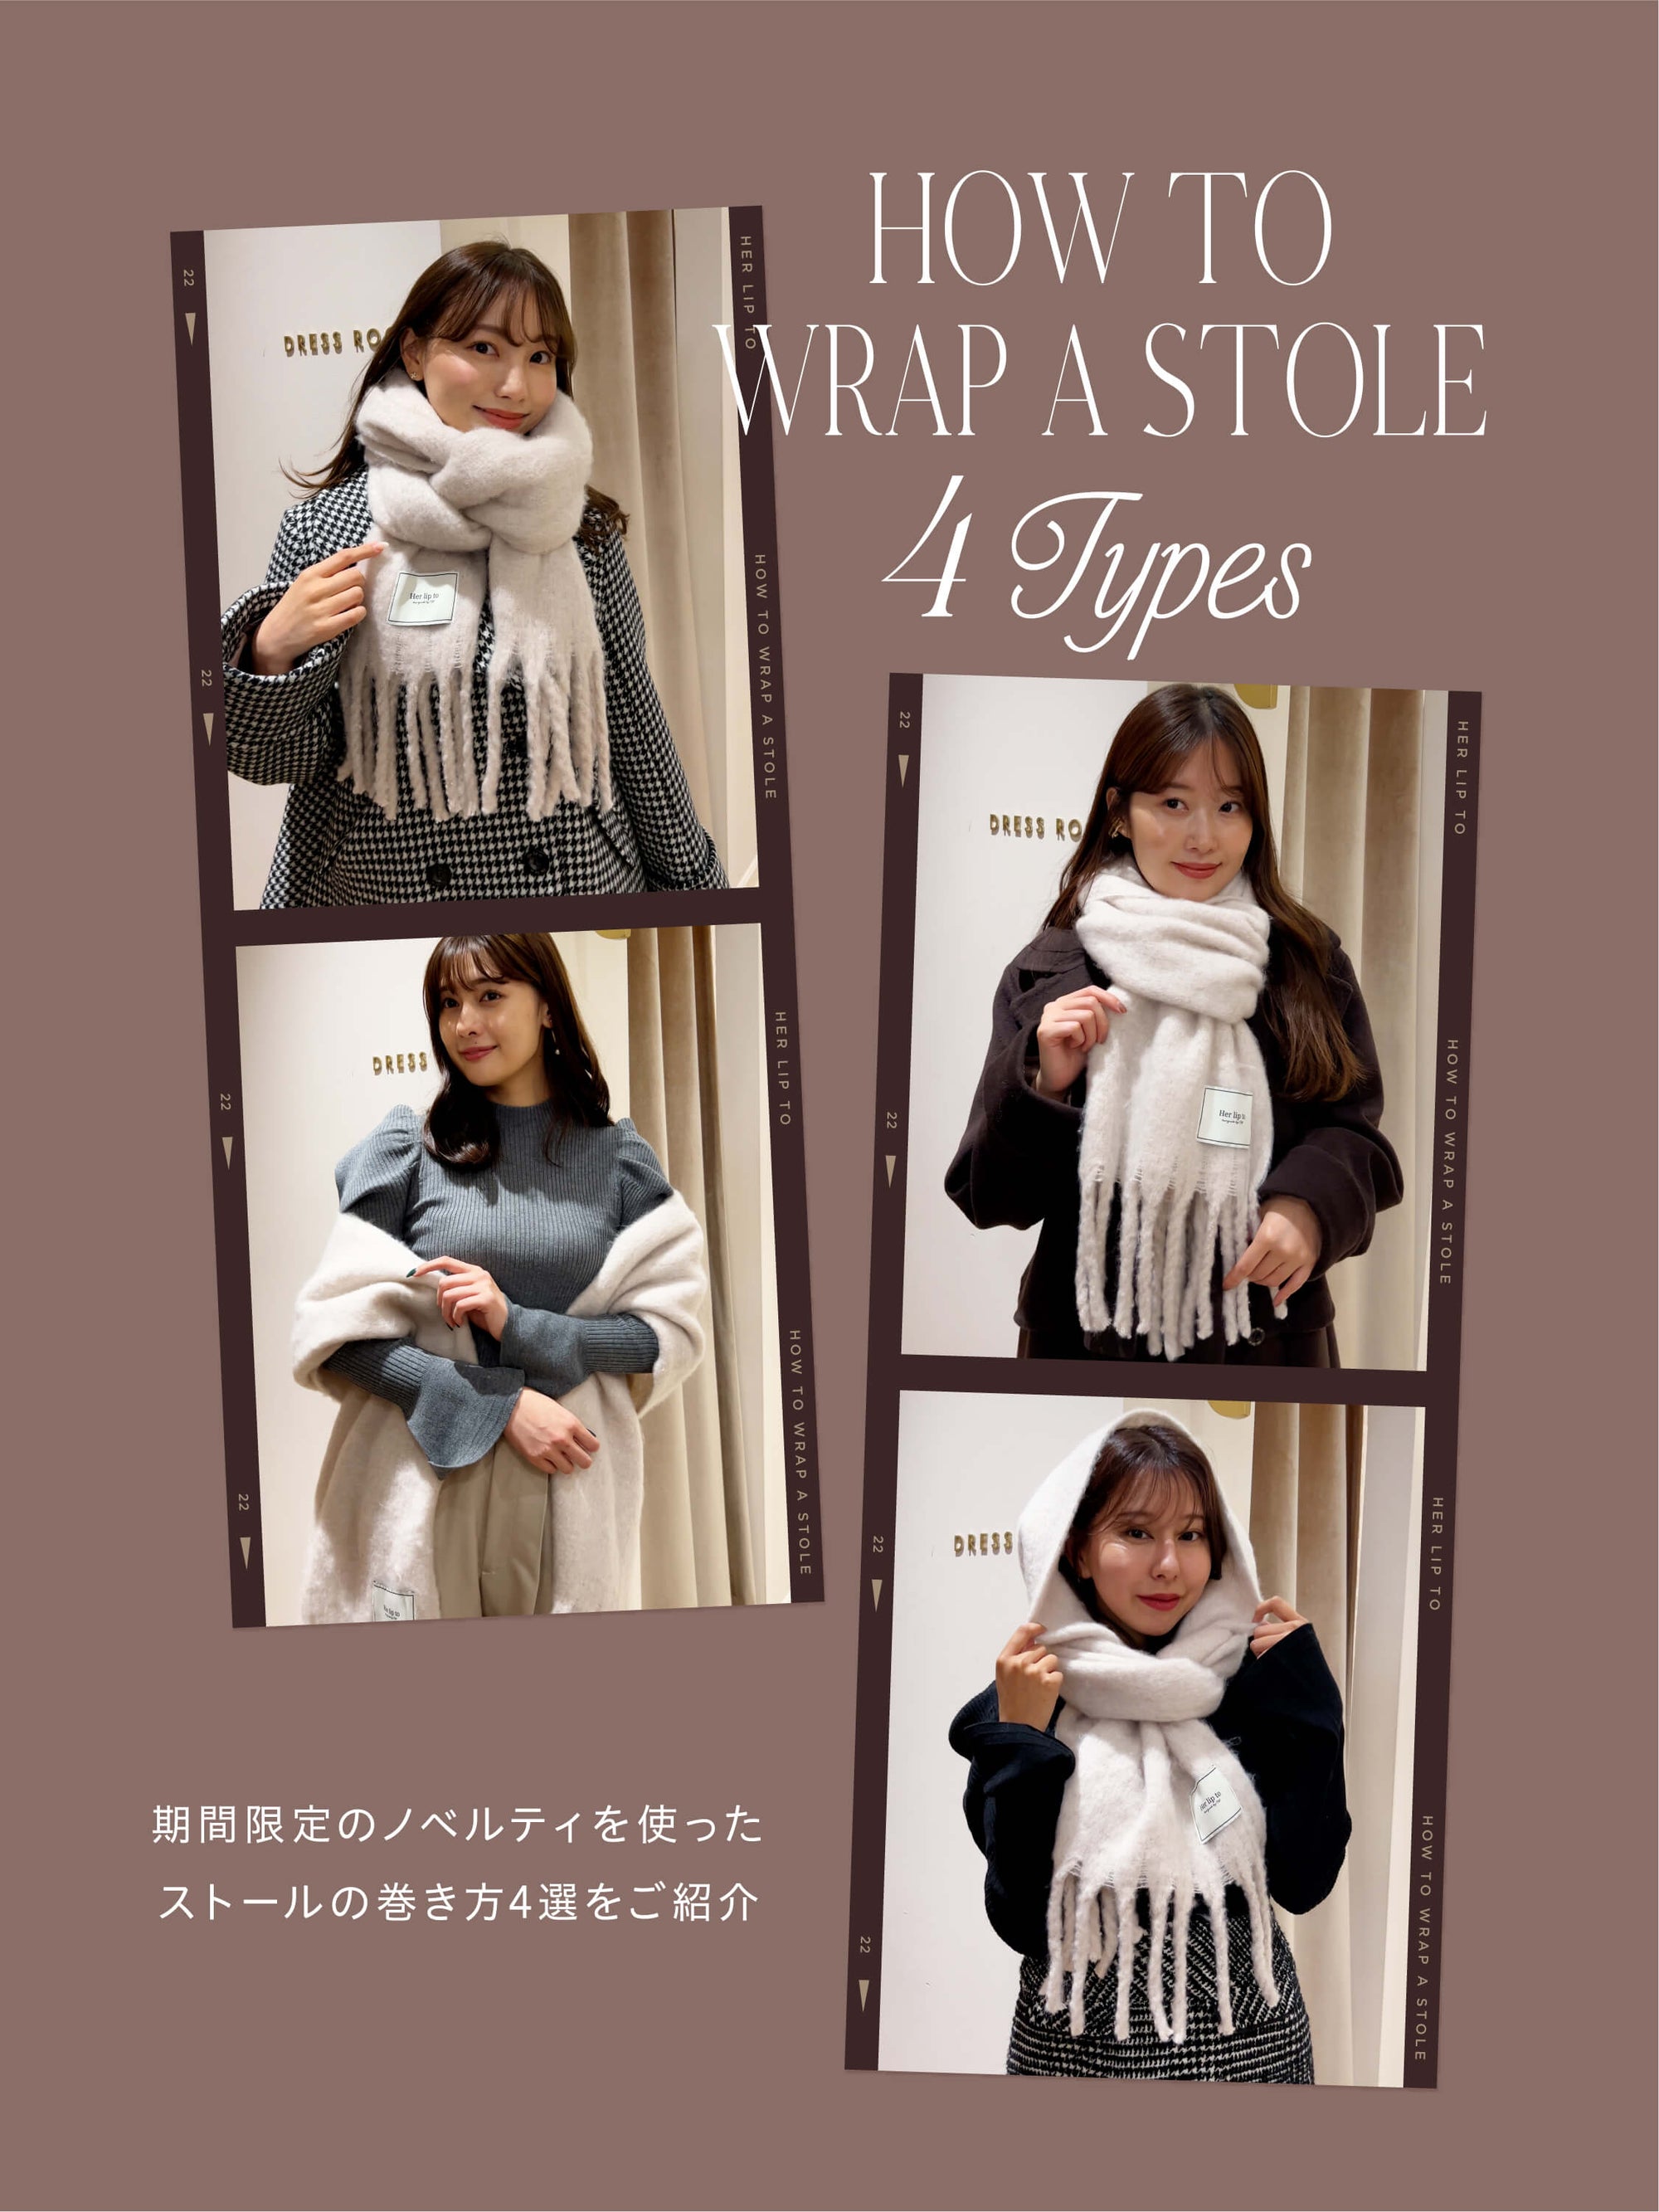 HOW TO WRAP A STOLE